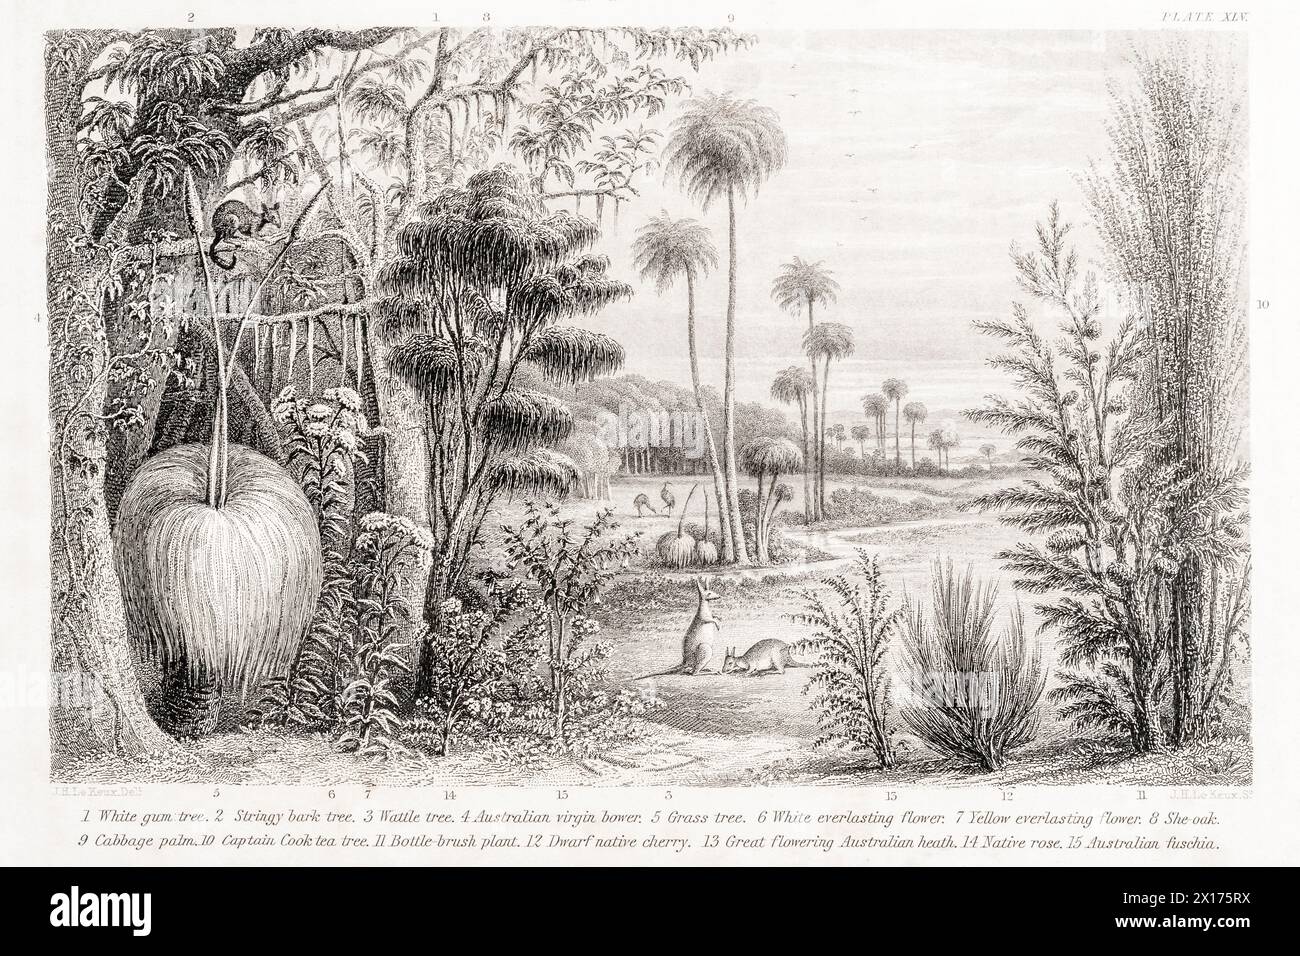 1872 Victorian botanical picture in William Rhind: Australian Trees & Shrubs. Gum tree, Stringy bark tree, Bottle Brush plant, & other exotic plants. Stock Photo